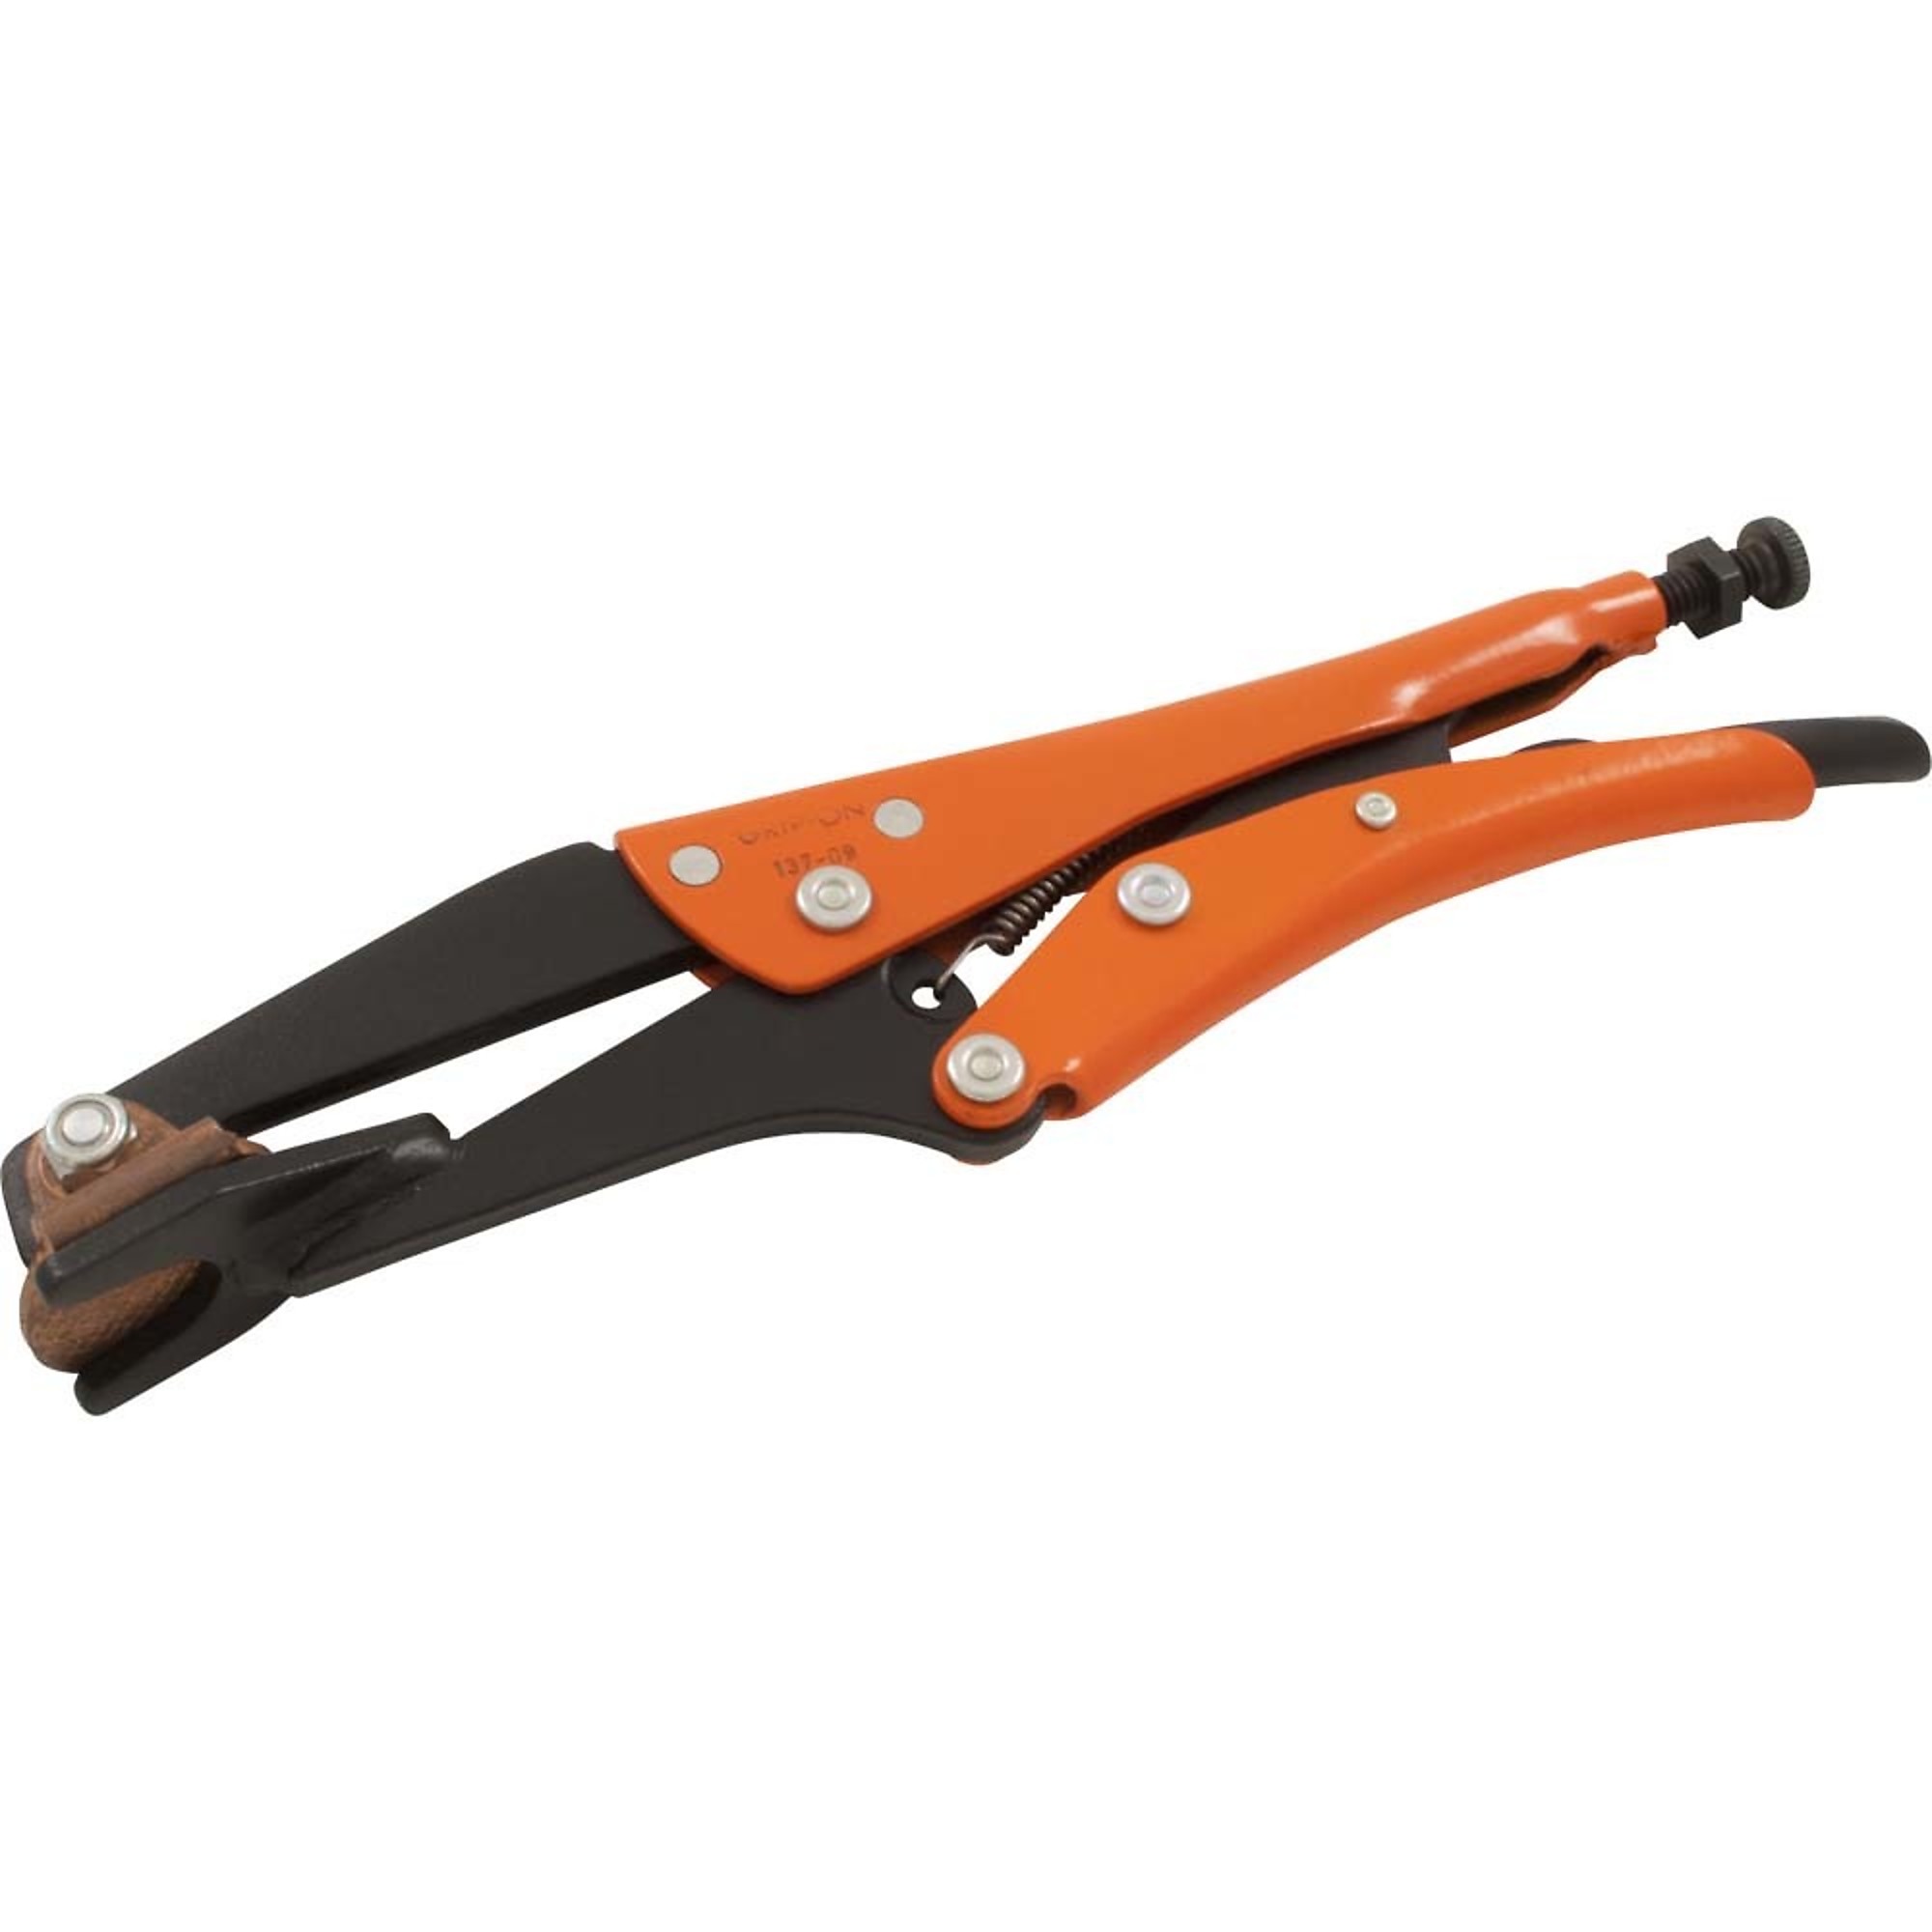 Grip-on, 9Inch Plugweld Locking Plier, 1-9/16Inch Jaw Opening, Pieces (qty.) 1 Material Alloy Steel, Jaw Capacity 1.38 in, Model 137-09